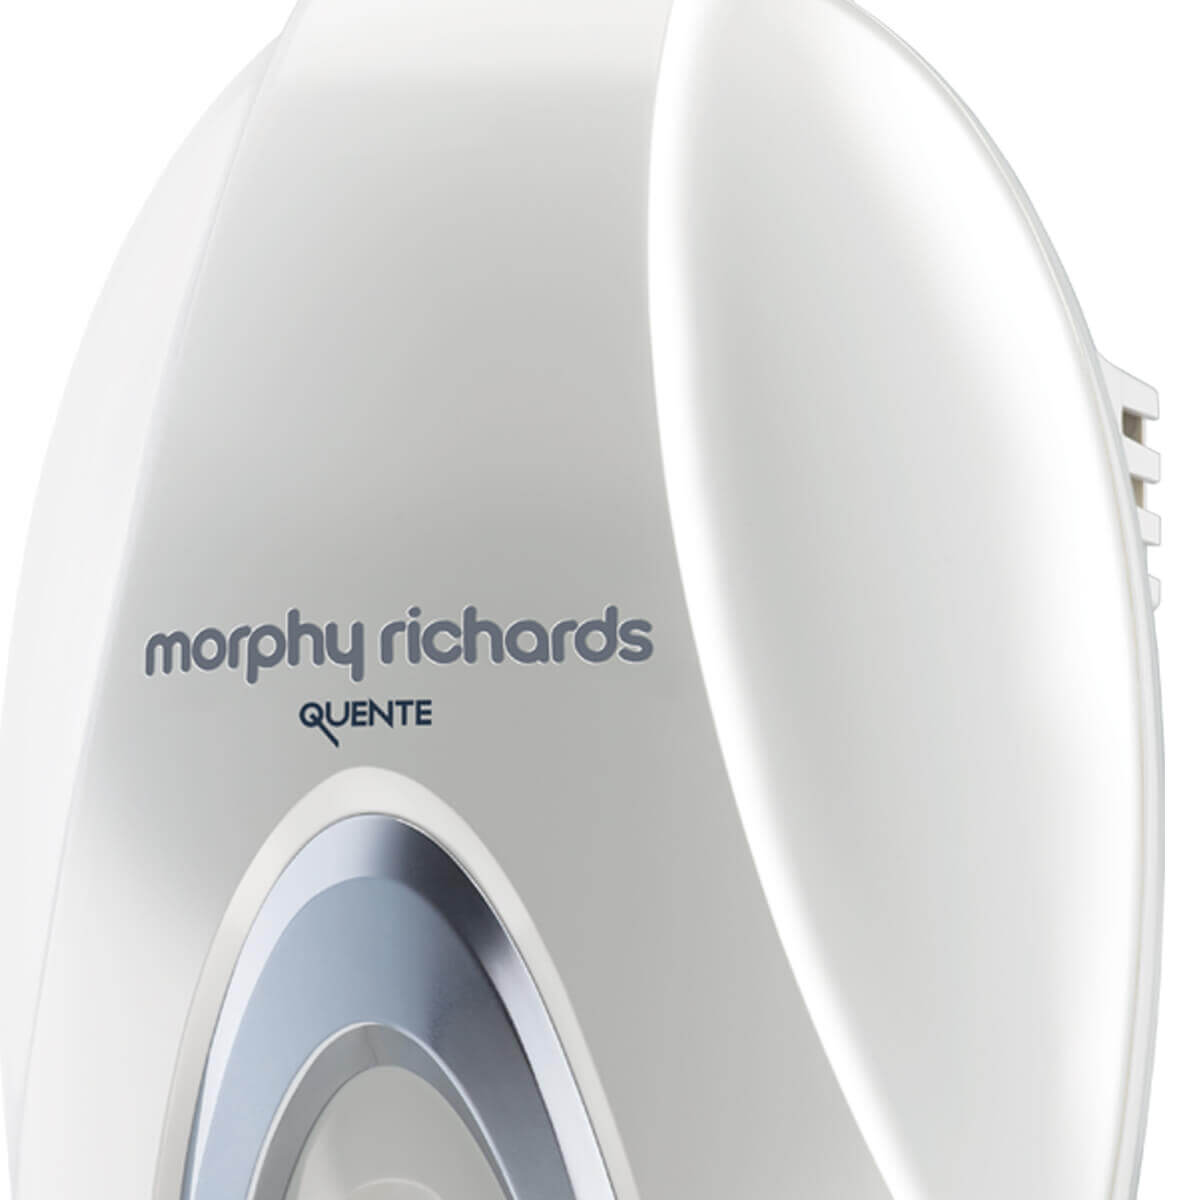 Morphy Richards Quente Water Heater 3 Litre-3 KW